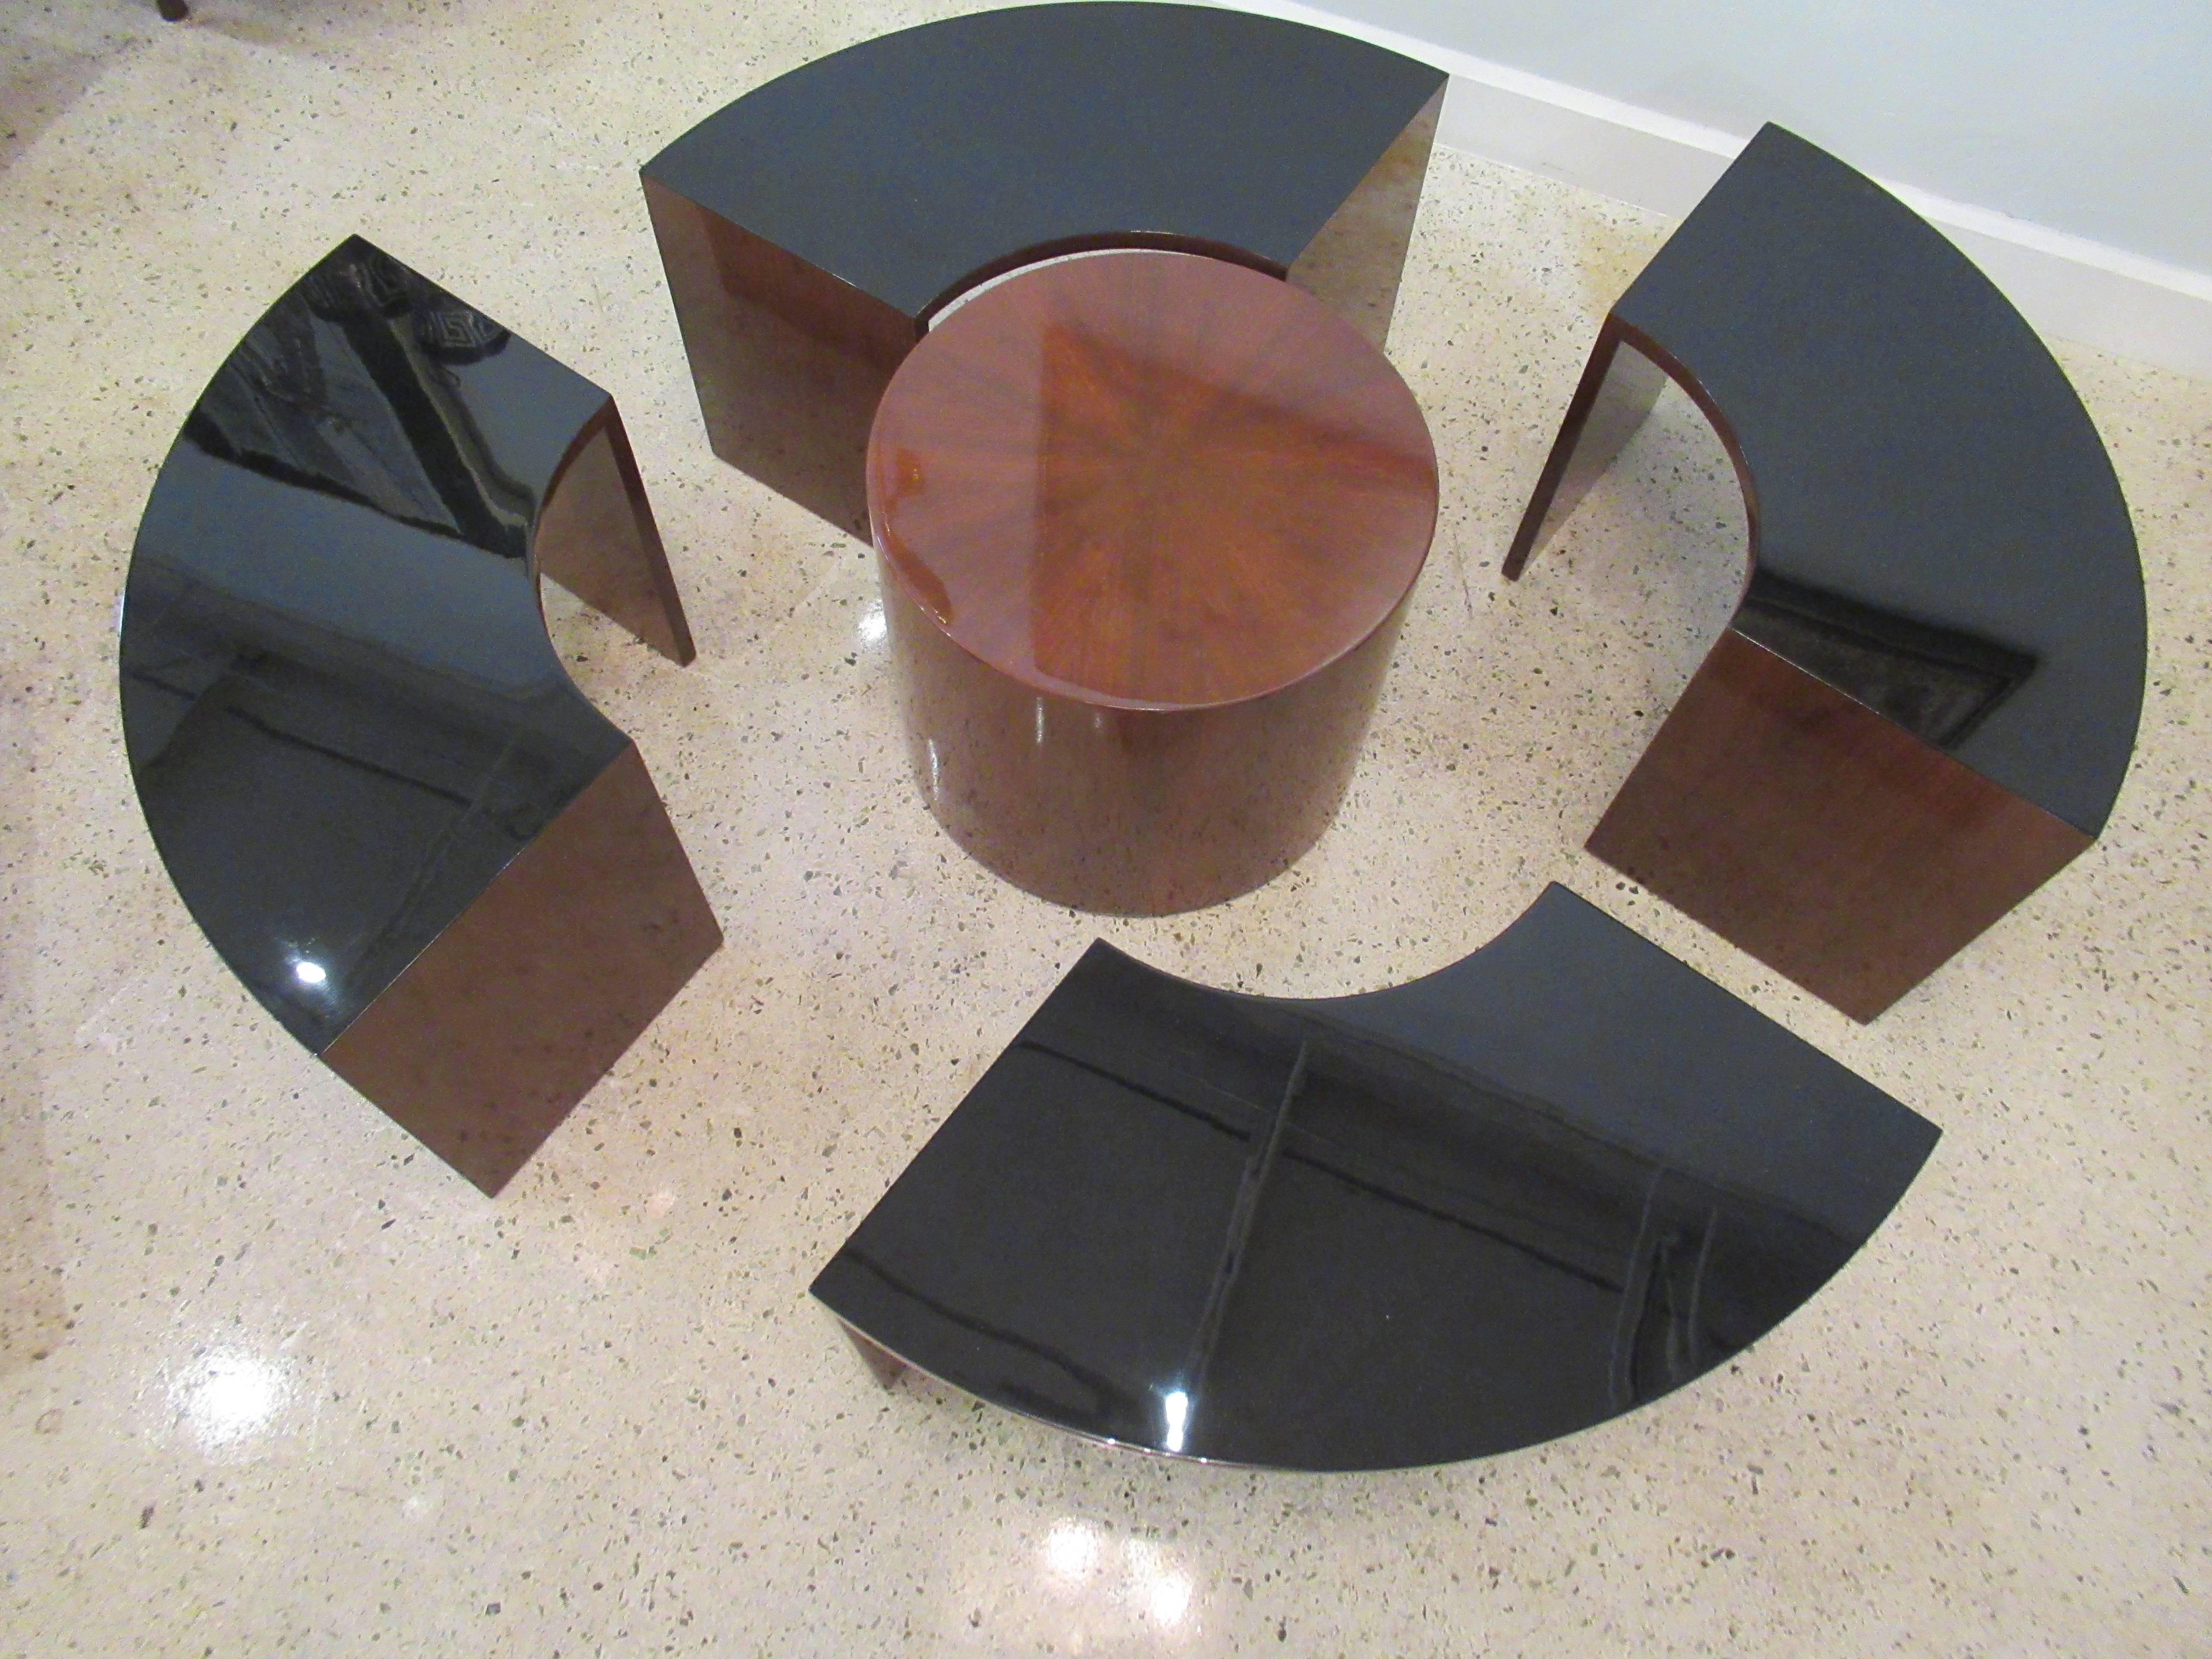 American Modern Mahogany and Lacquer 5 Piece Prototype Low Table, Harvey Probber For Sale 4